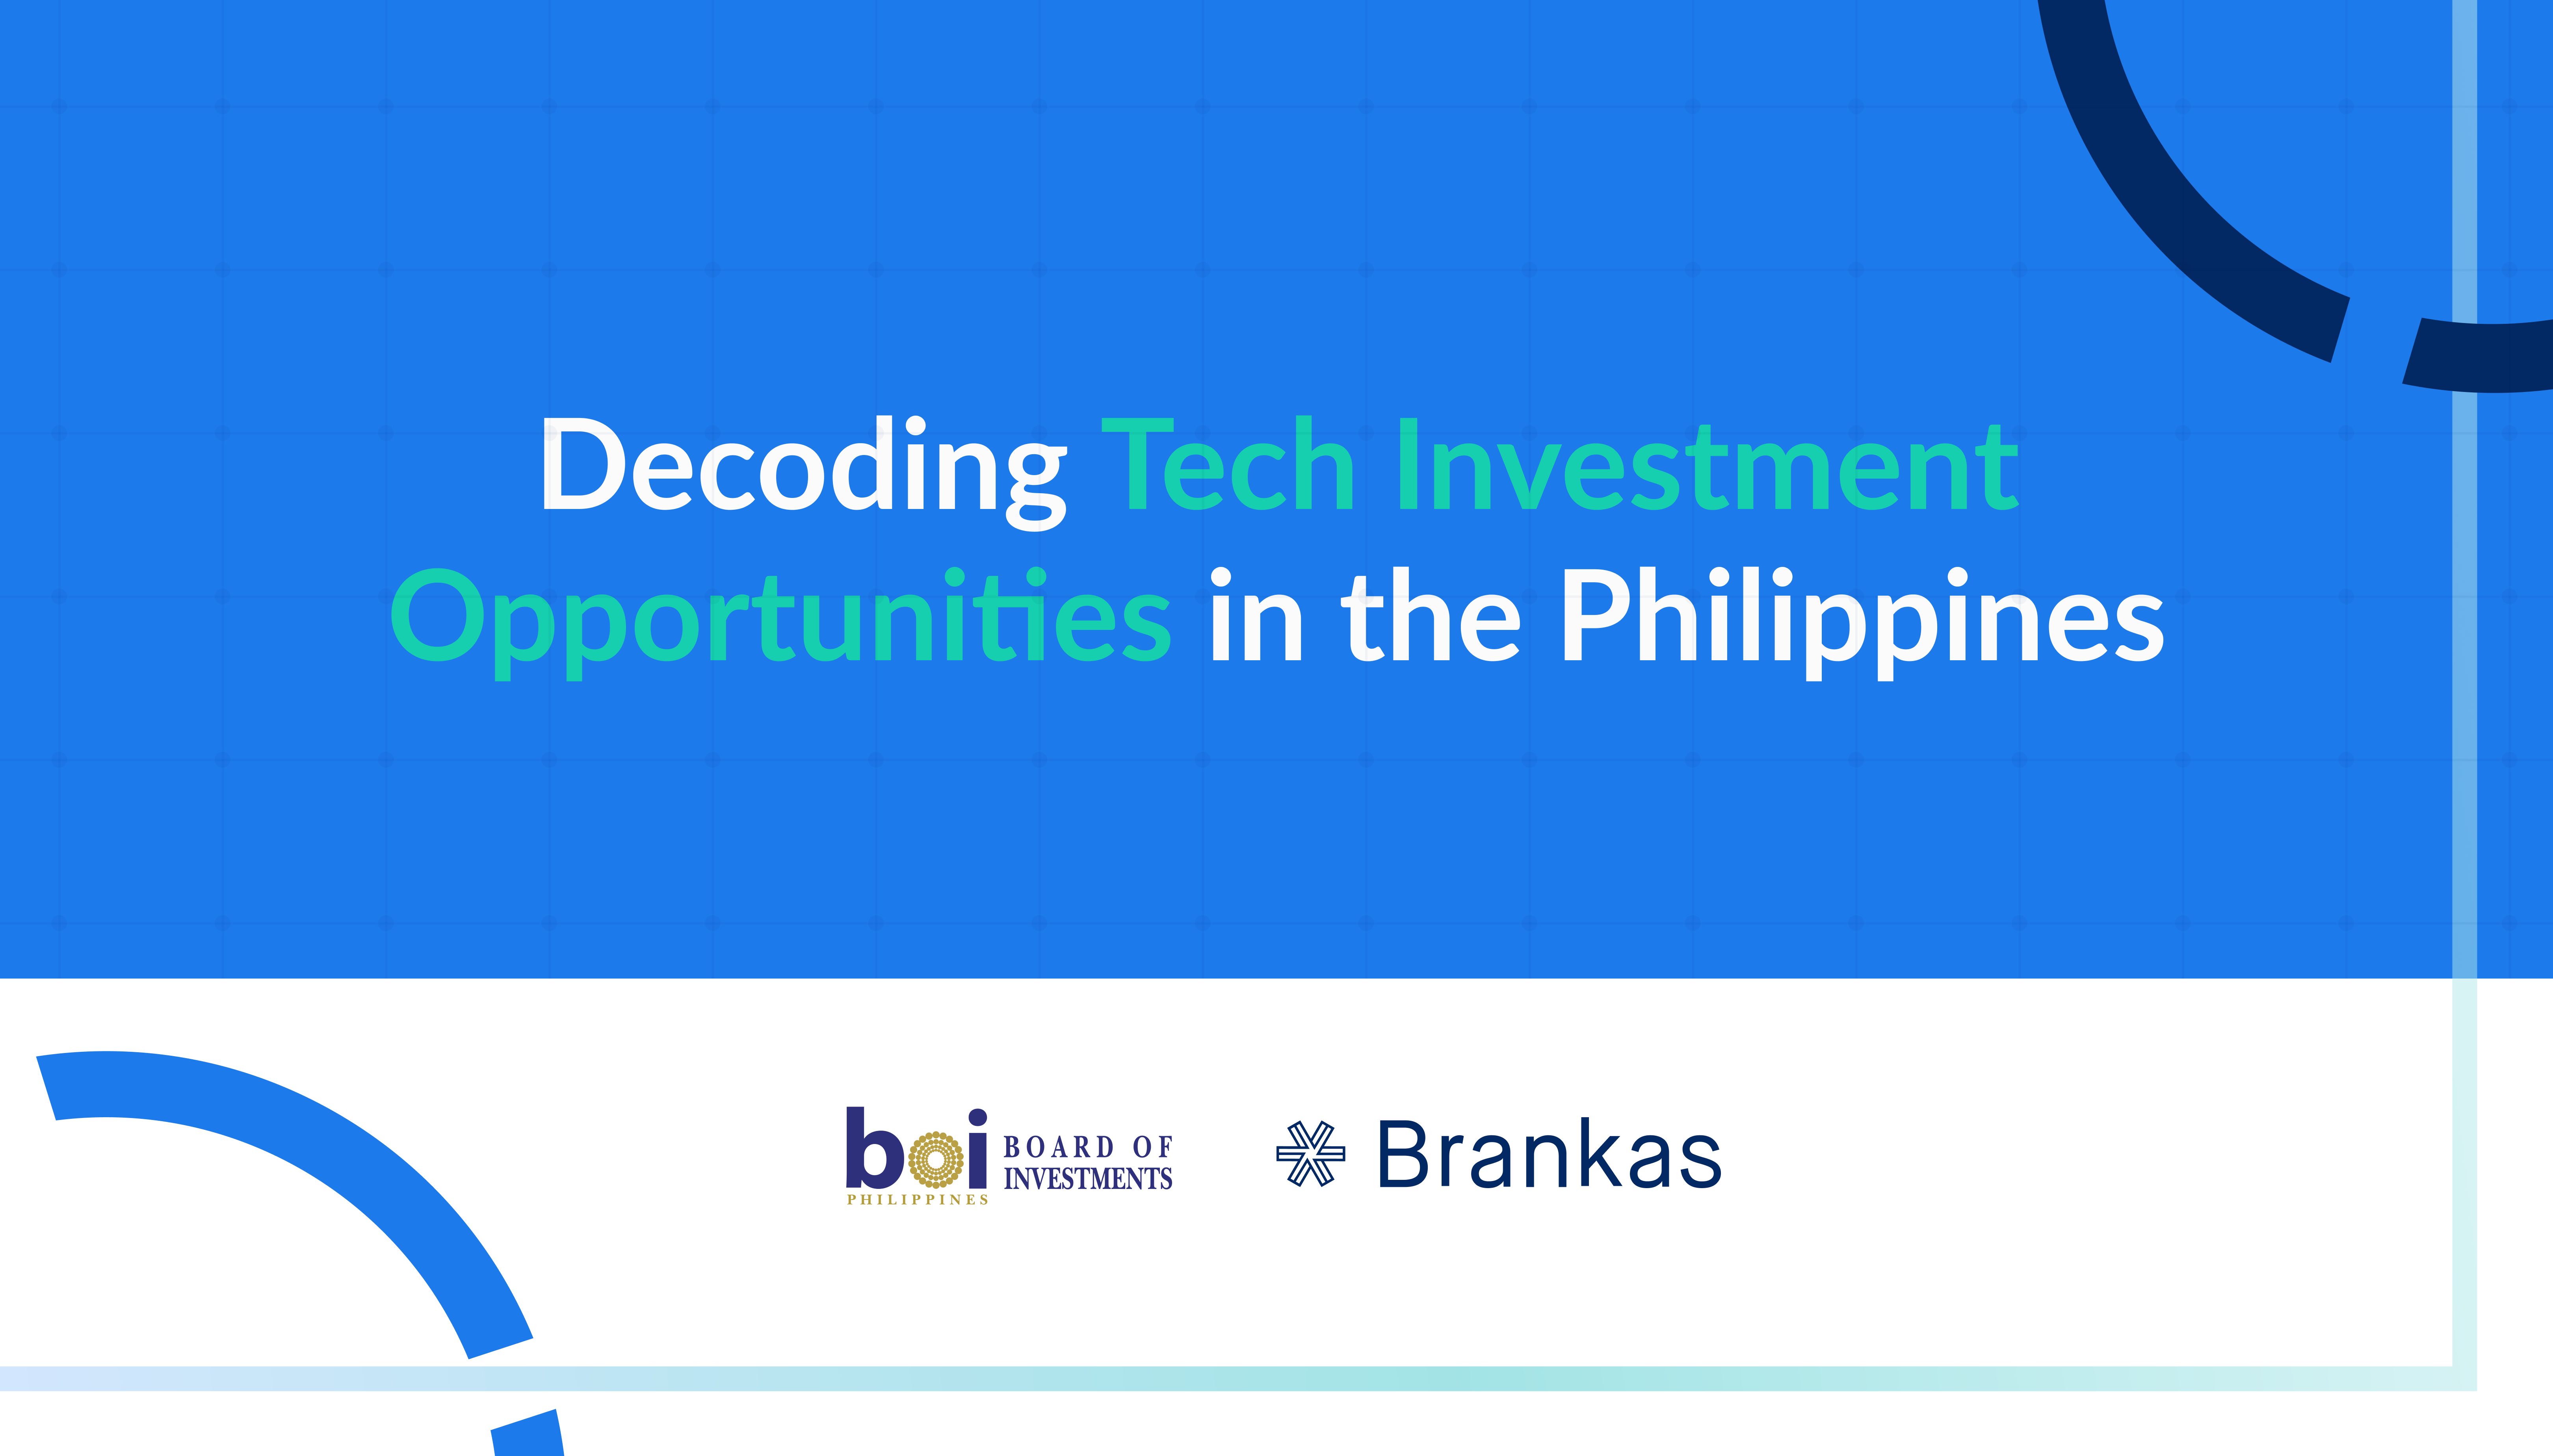 Decoding Technology Investment Opportunities in the Philippines